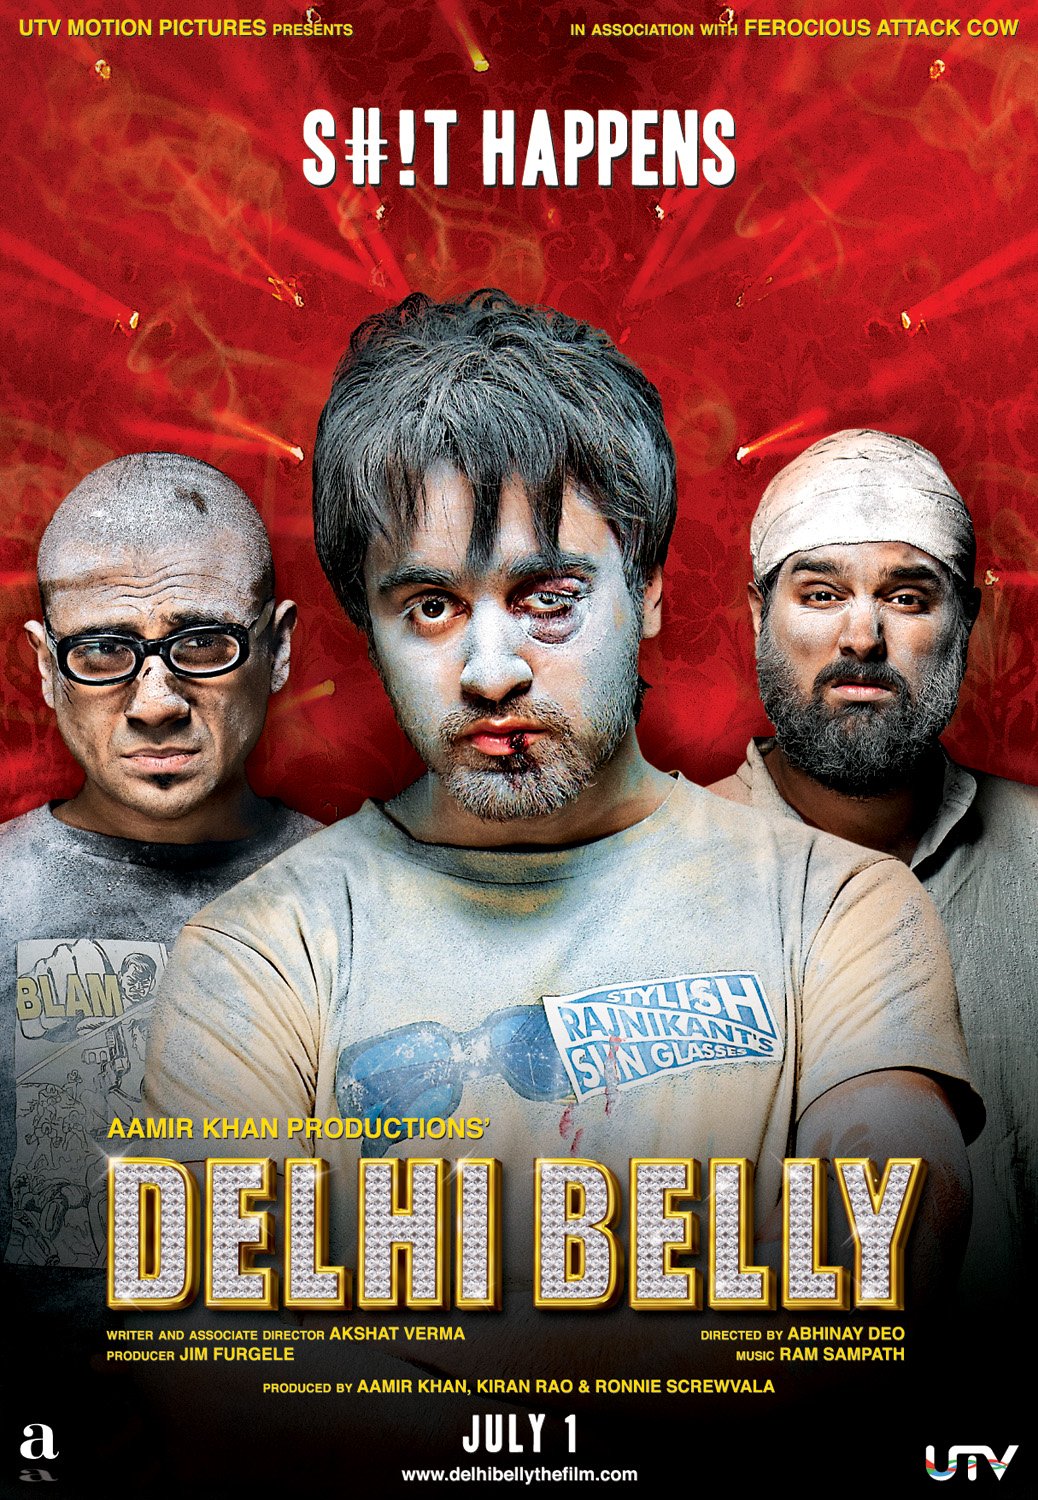 chayanika banerjee recommends belly movie free download pic